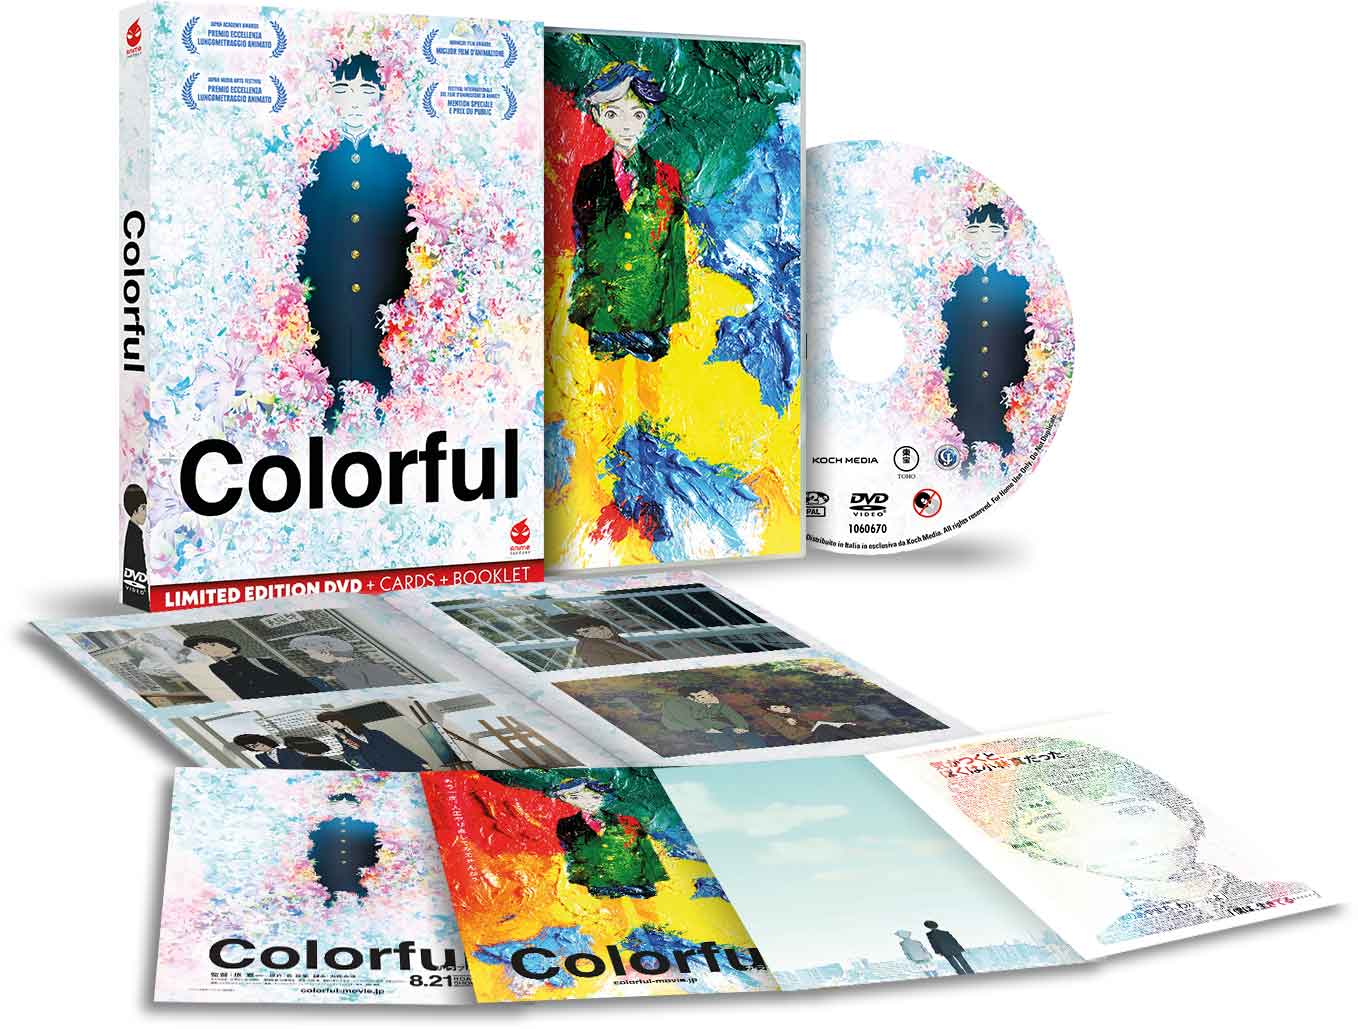 Colorful - Limited Edition DVD + Cards + Booklet (DVD) Image 2